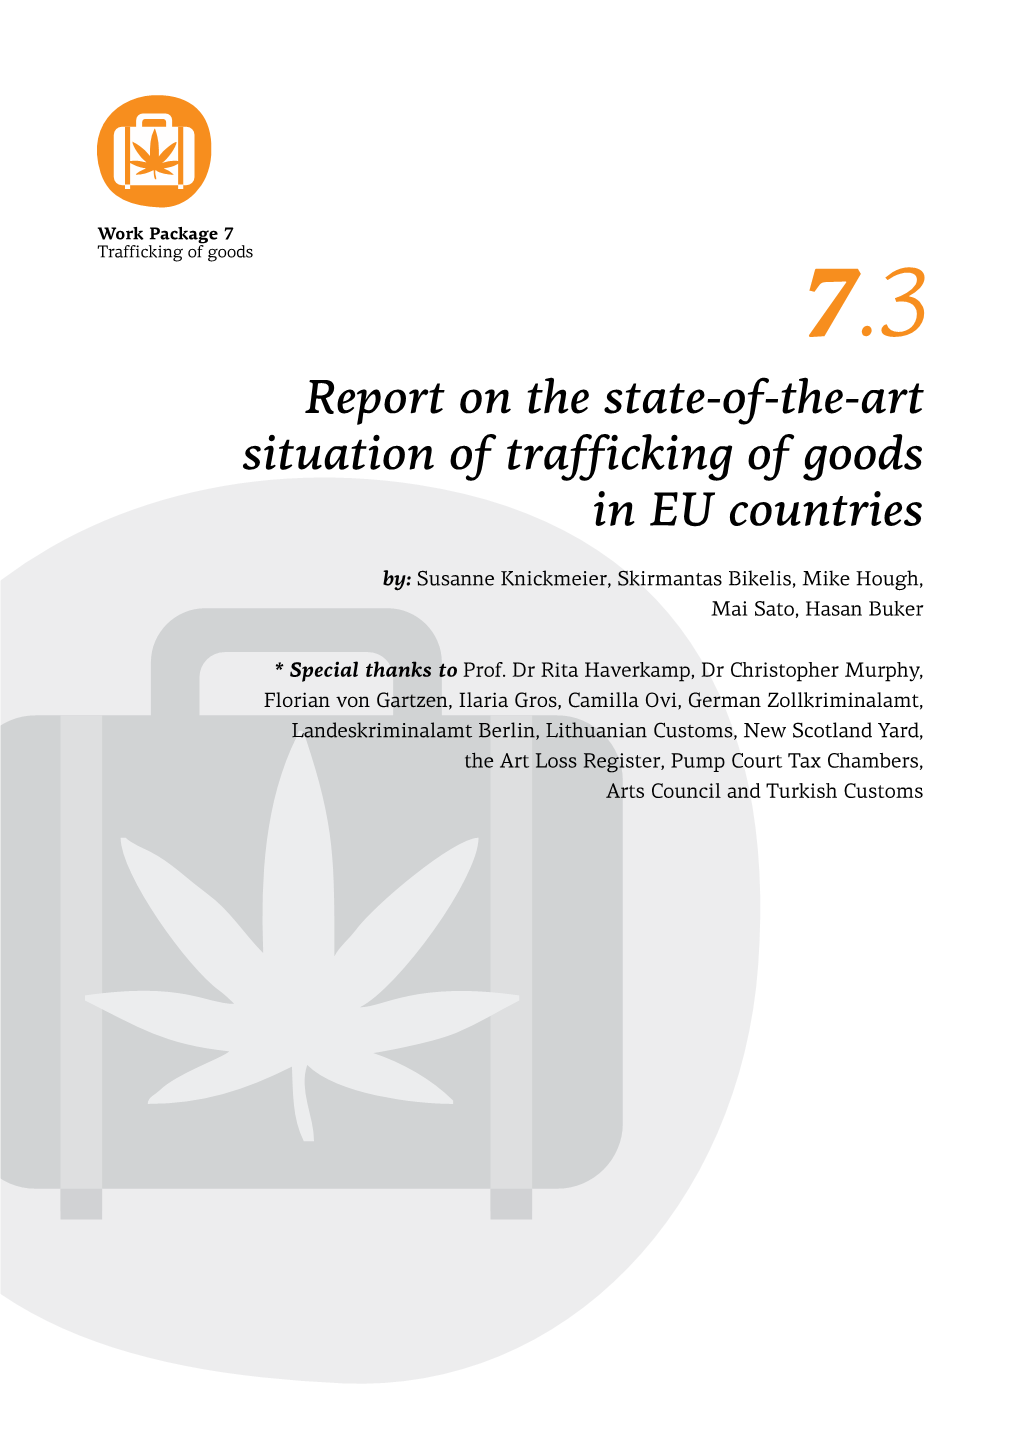 Report on the State-Of-The-Art Situation of Trafficking of Goods in EU Countries